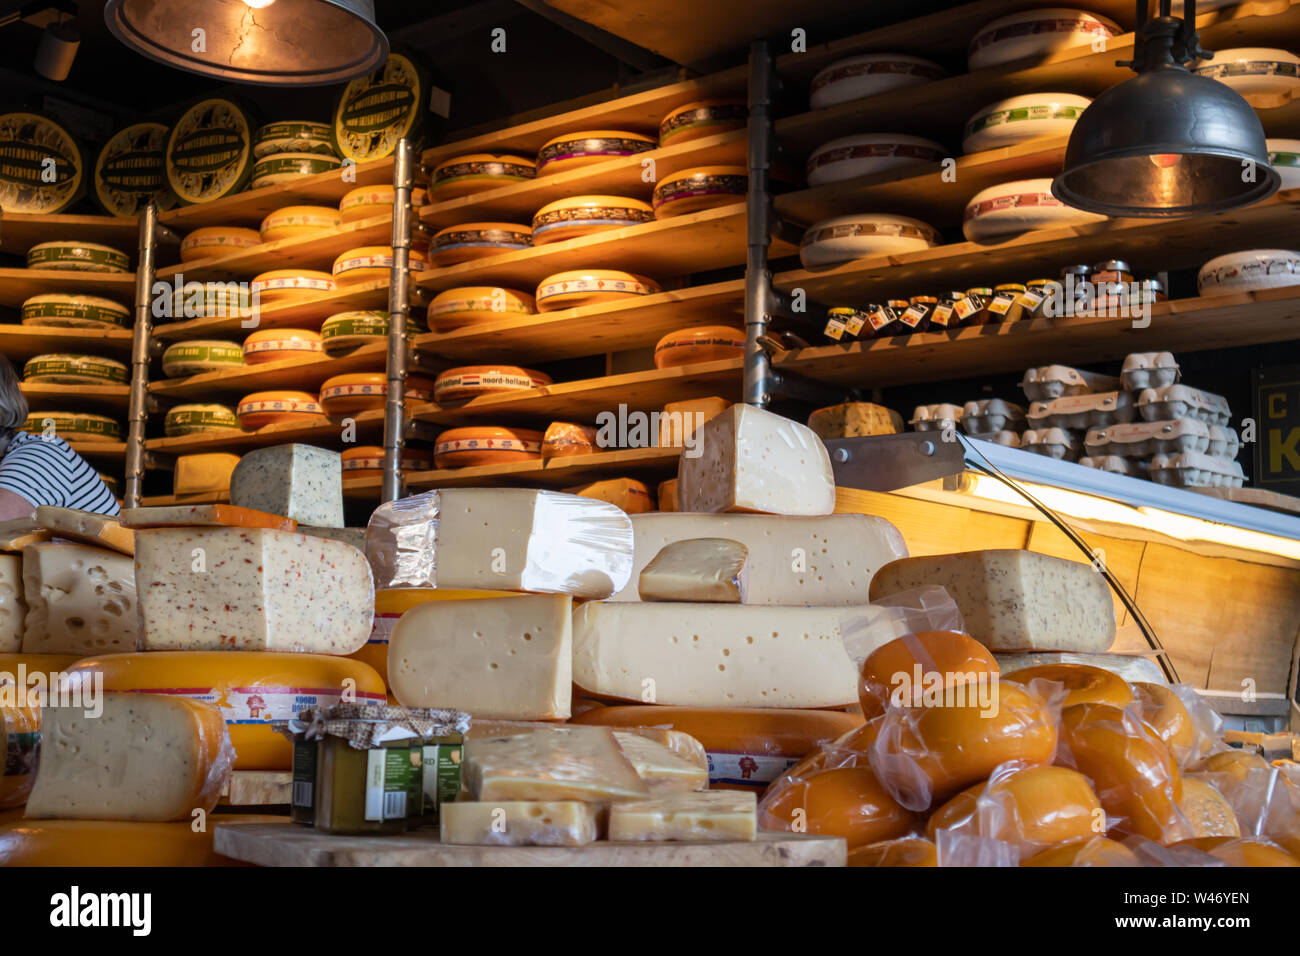 Rotterdam Netherlands, June 27, 2019. Dutch cheeses, edam, gouda, whole round wheels in a traditional cheese store in Rotterdam markthal Stock Photo